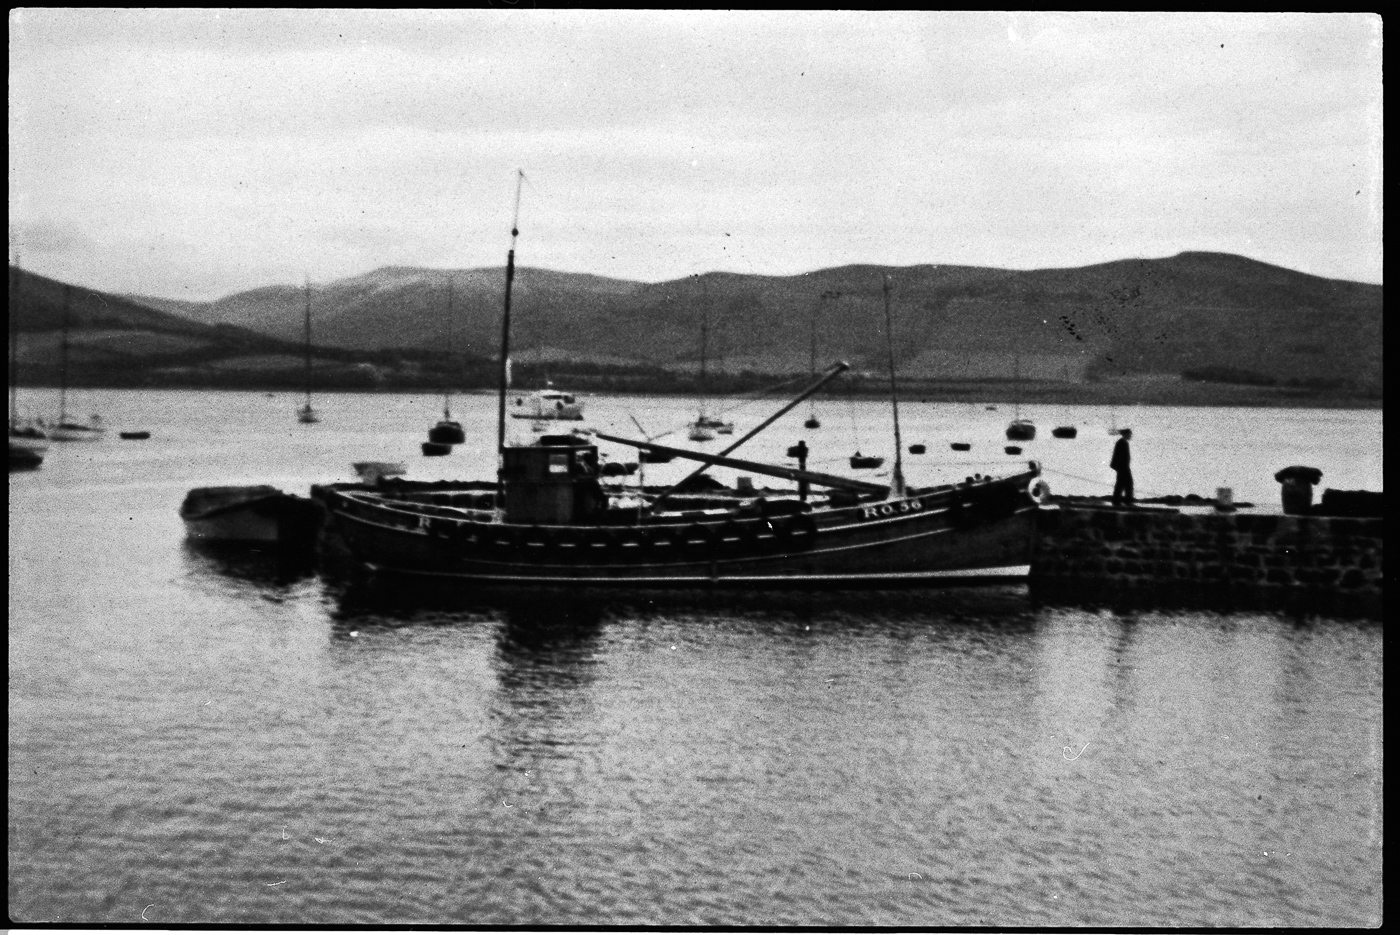 'Maid of the Mist', RO56, in harbour, Port Bannatyne.